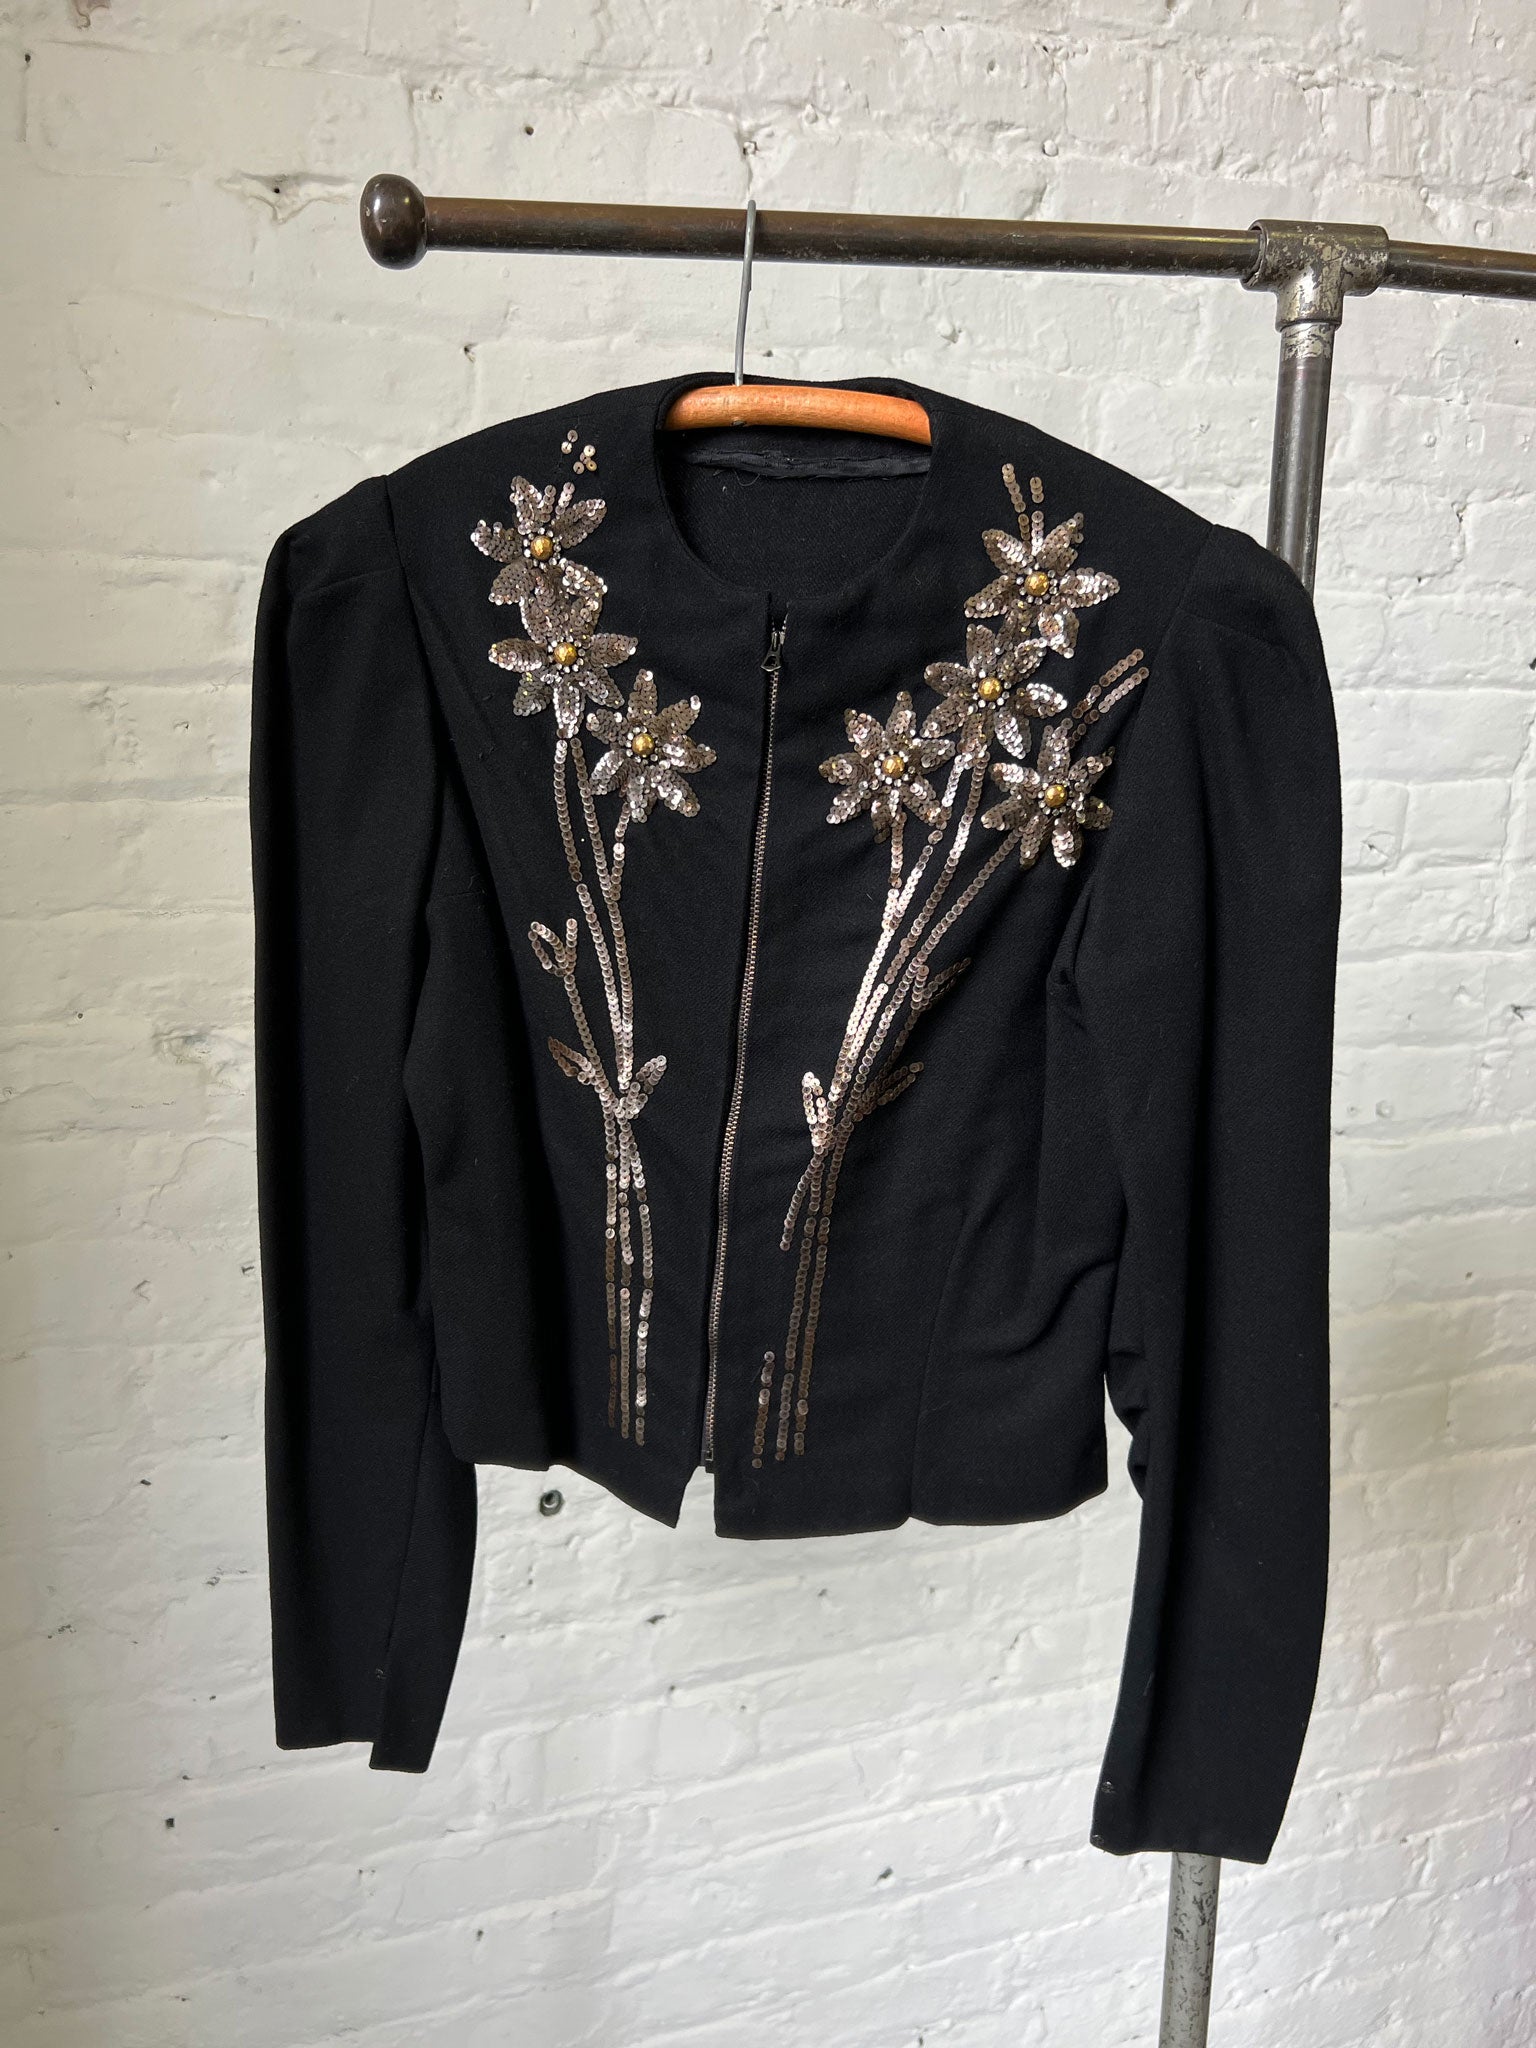 Vintage Early 1930's Black Wool Zip Up Jacket, Top with Sequins, Floral Motif Women's 30's